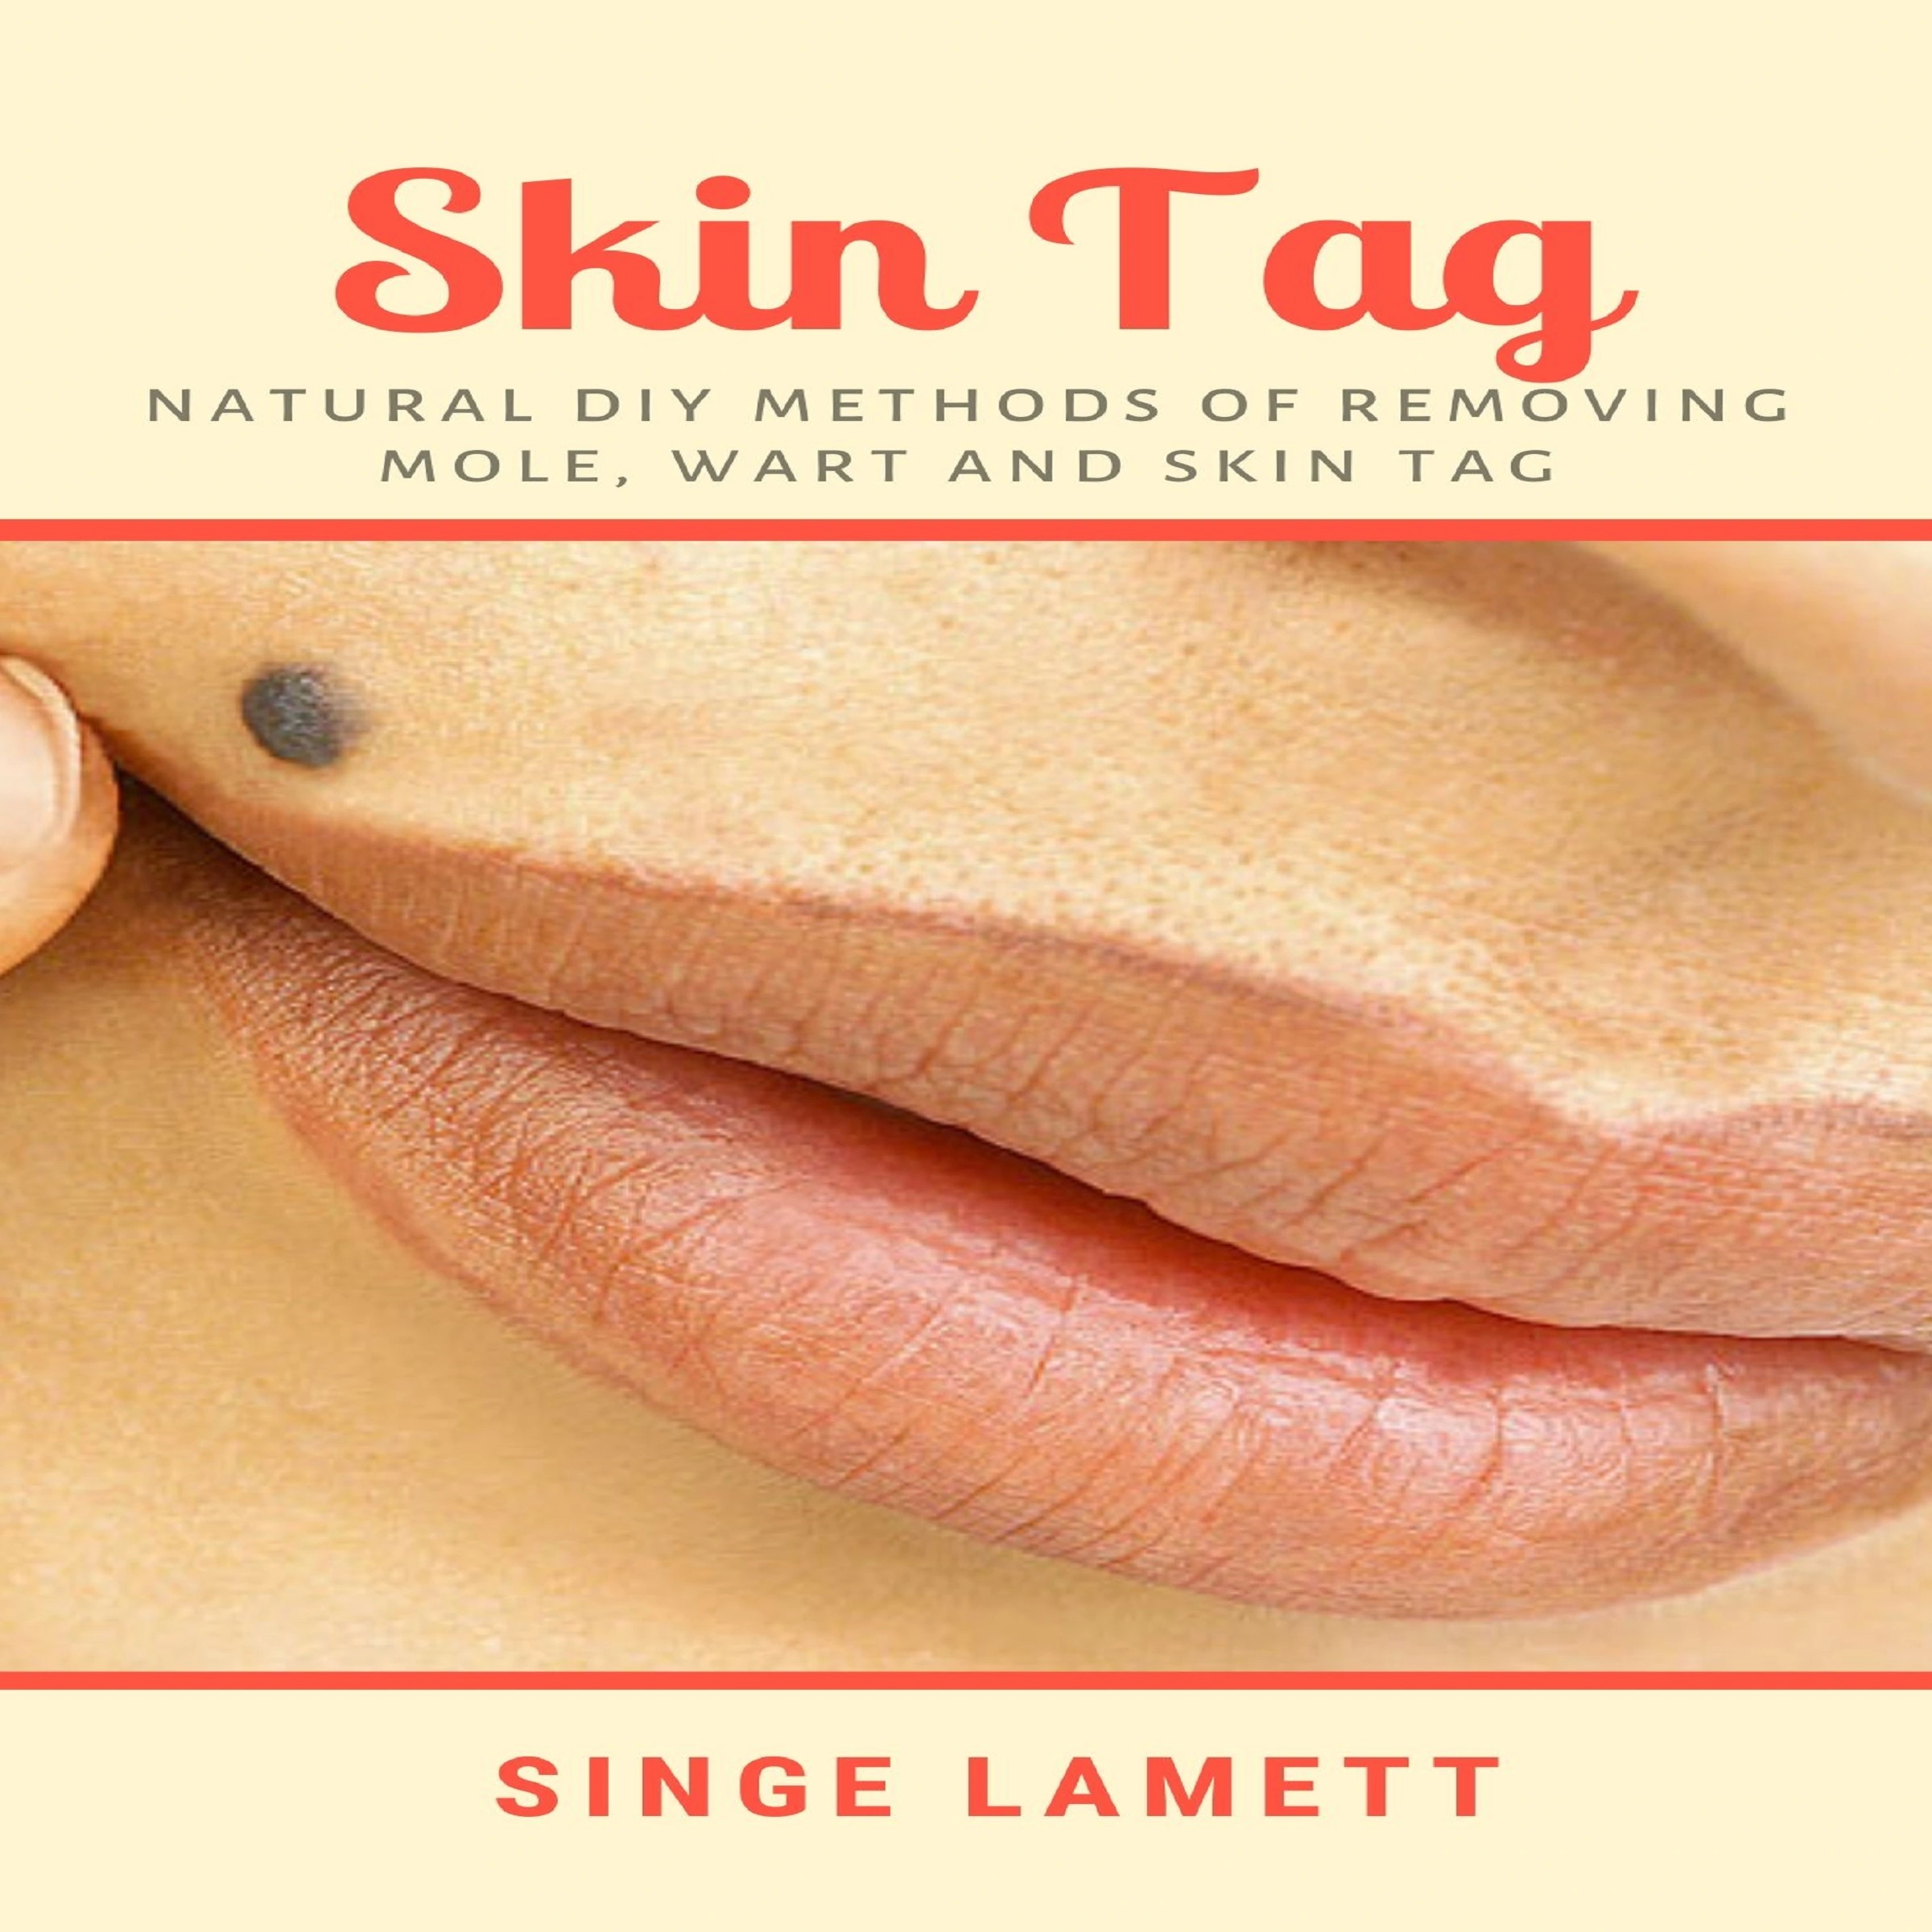 Skin Tag : Natural DIY Methods of removing Mole, Wart and Skin Tag Audiobook by Singe Lamett